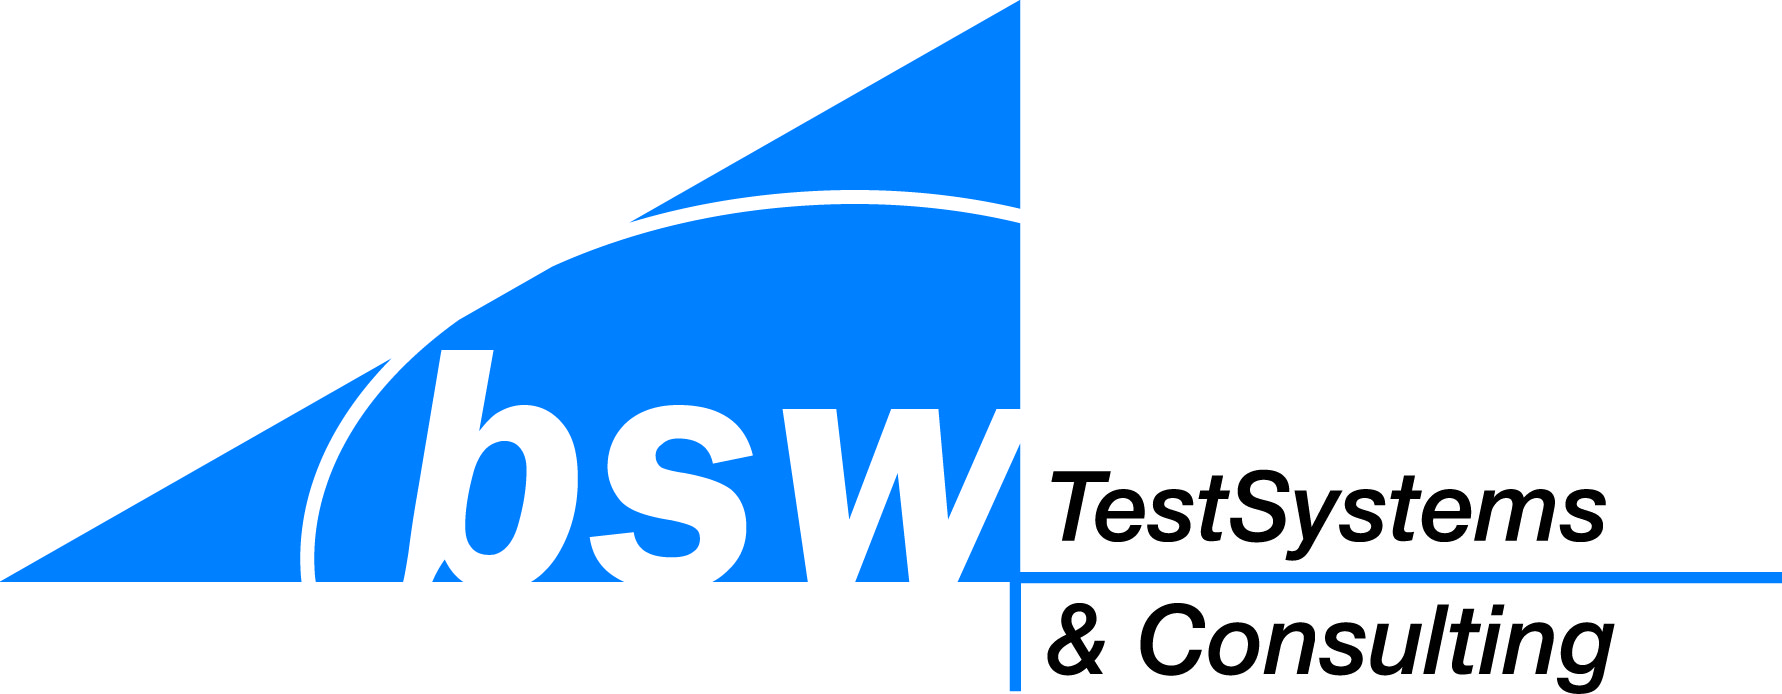 bsw TestSystems & Consulting AG_logo